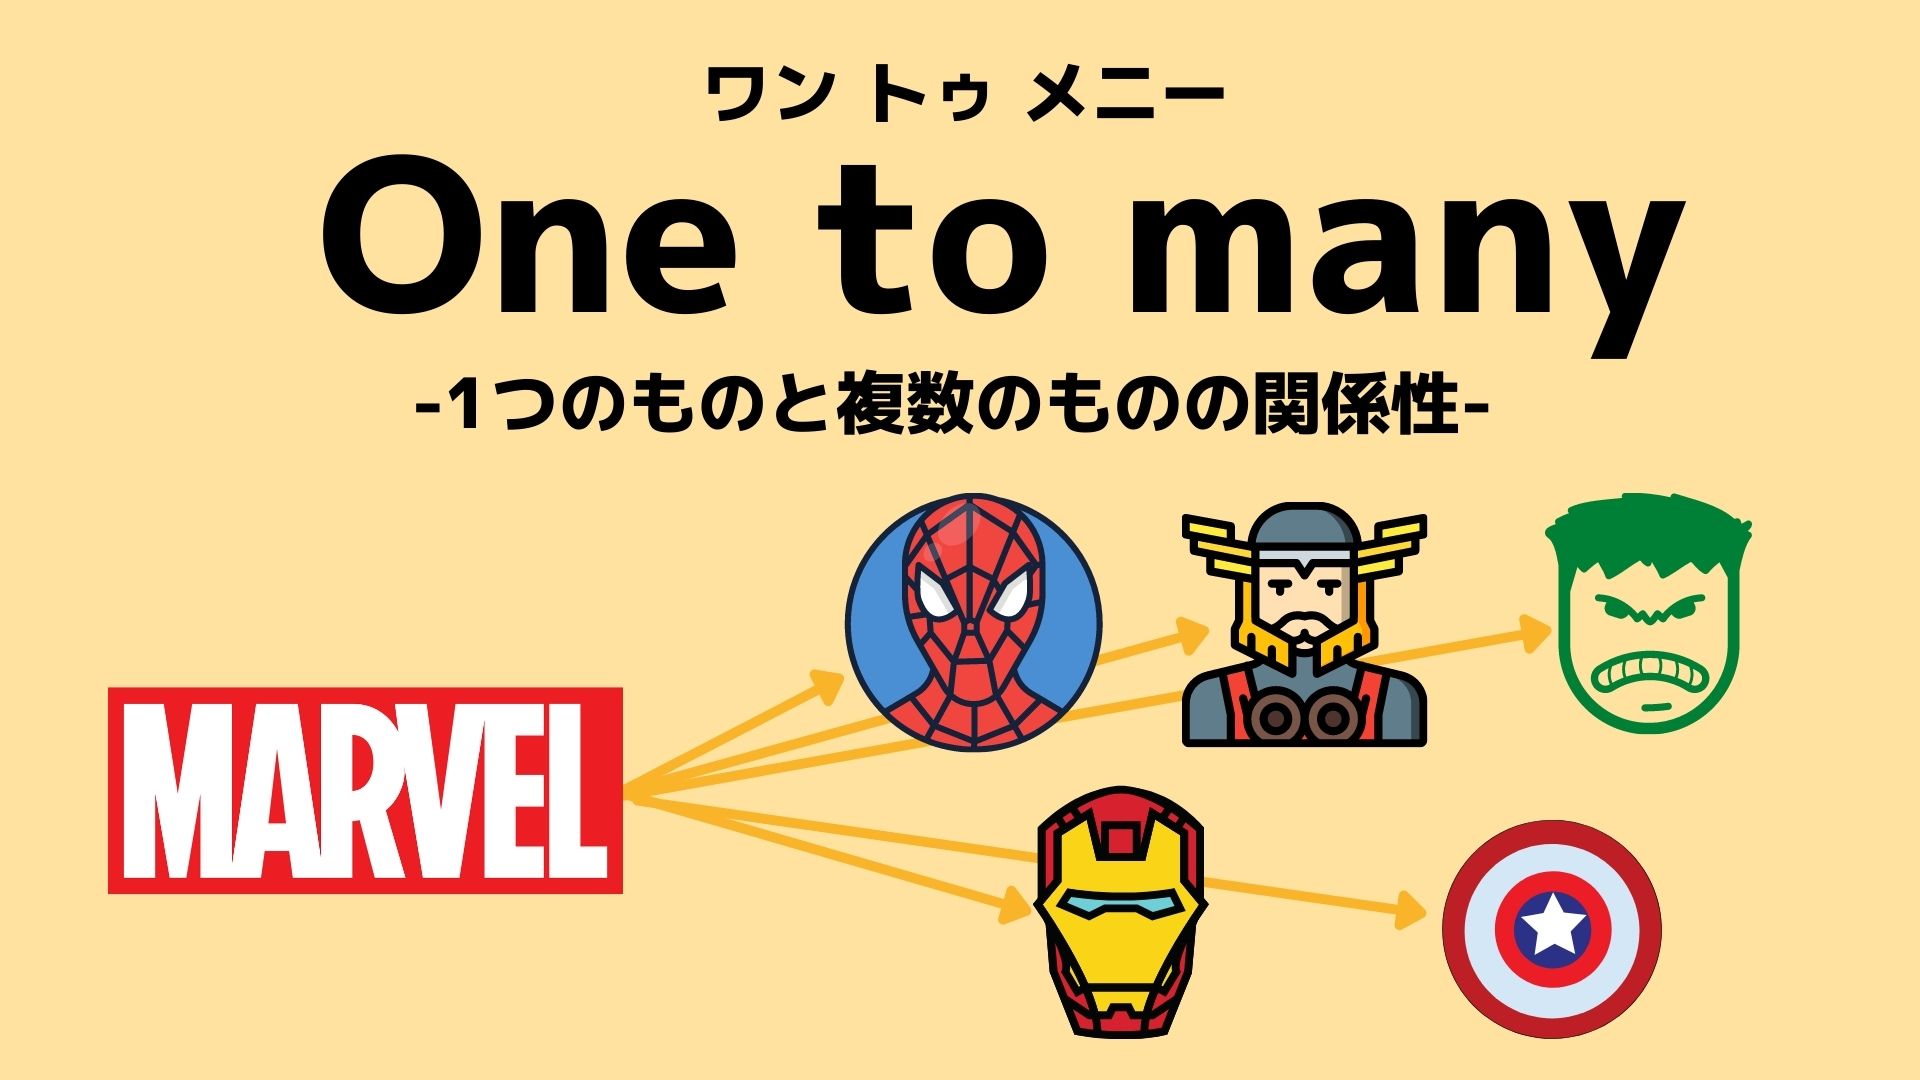 Relation　Typeの『One to many』を説明した図